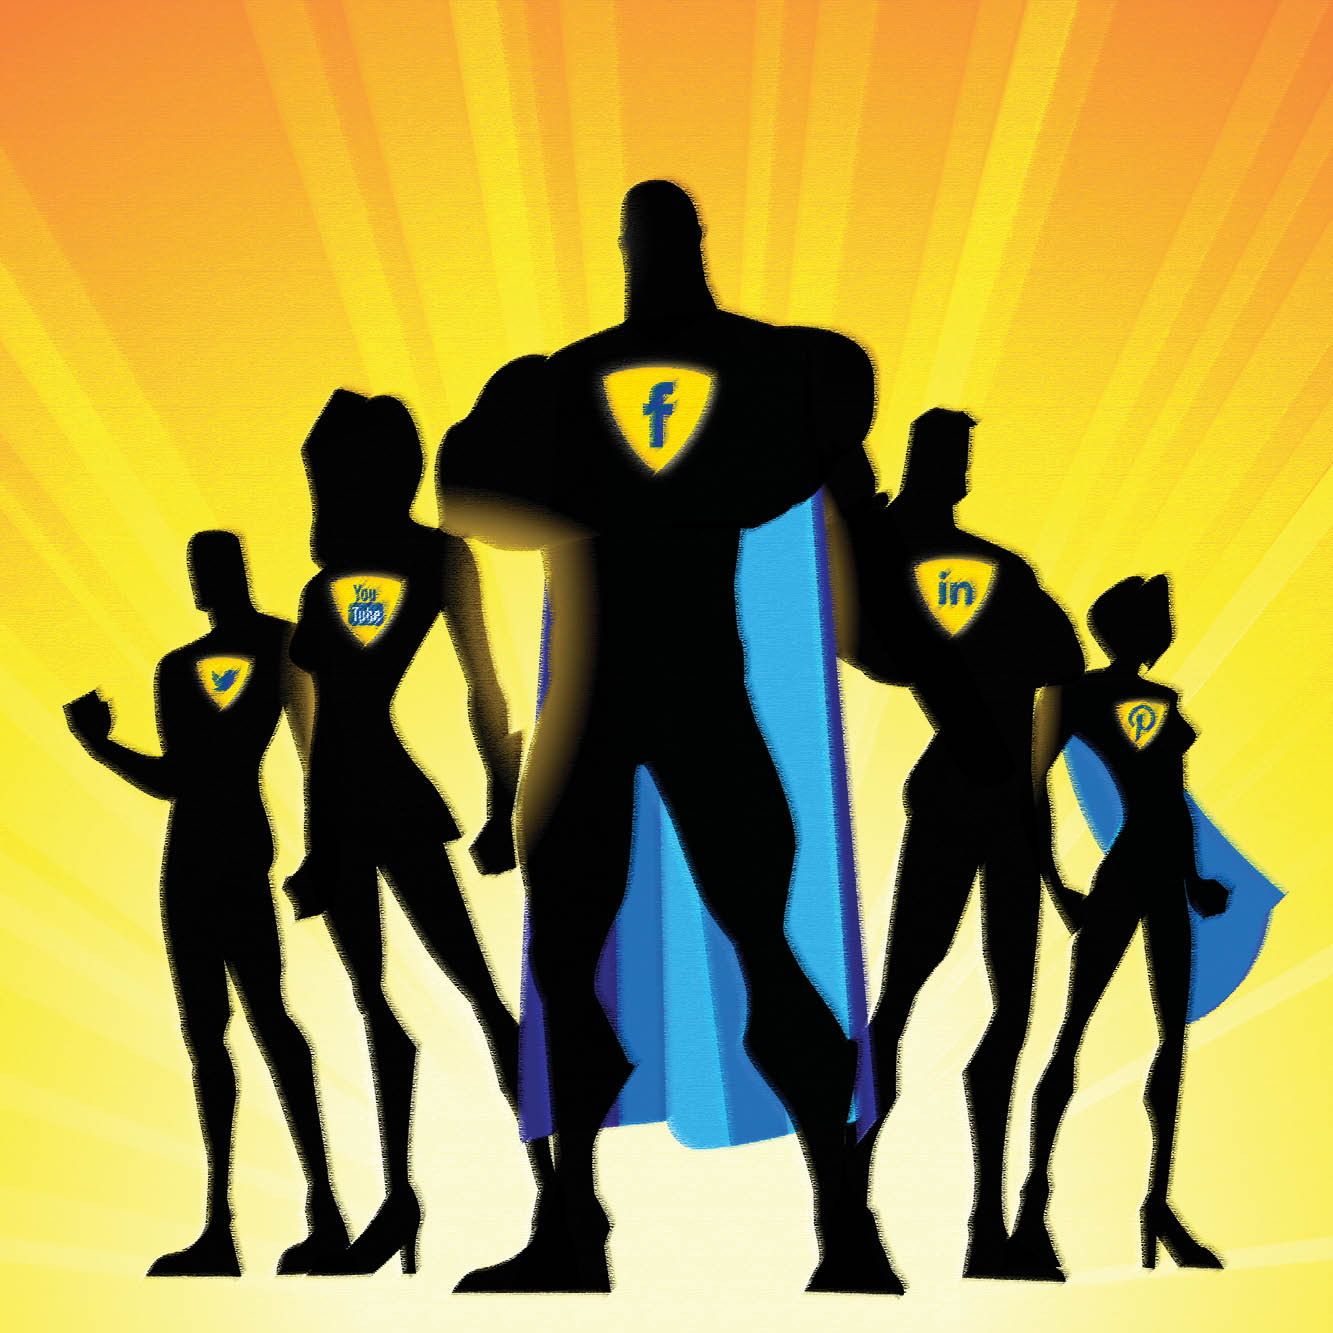 Illustration of a group superhero silhouettes, each one with a different social media icon on the chest